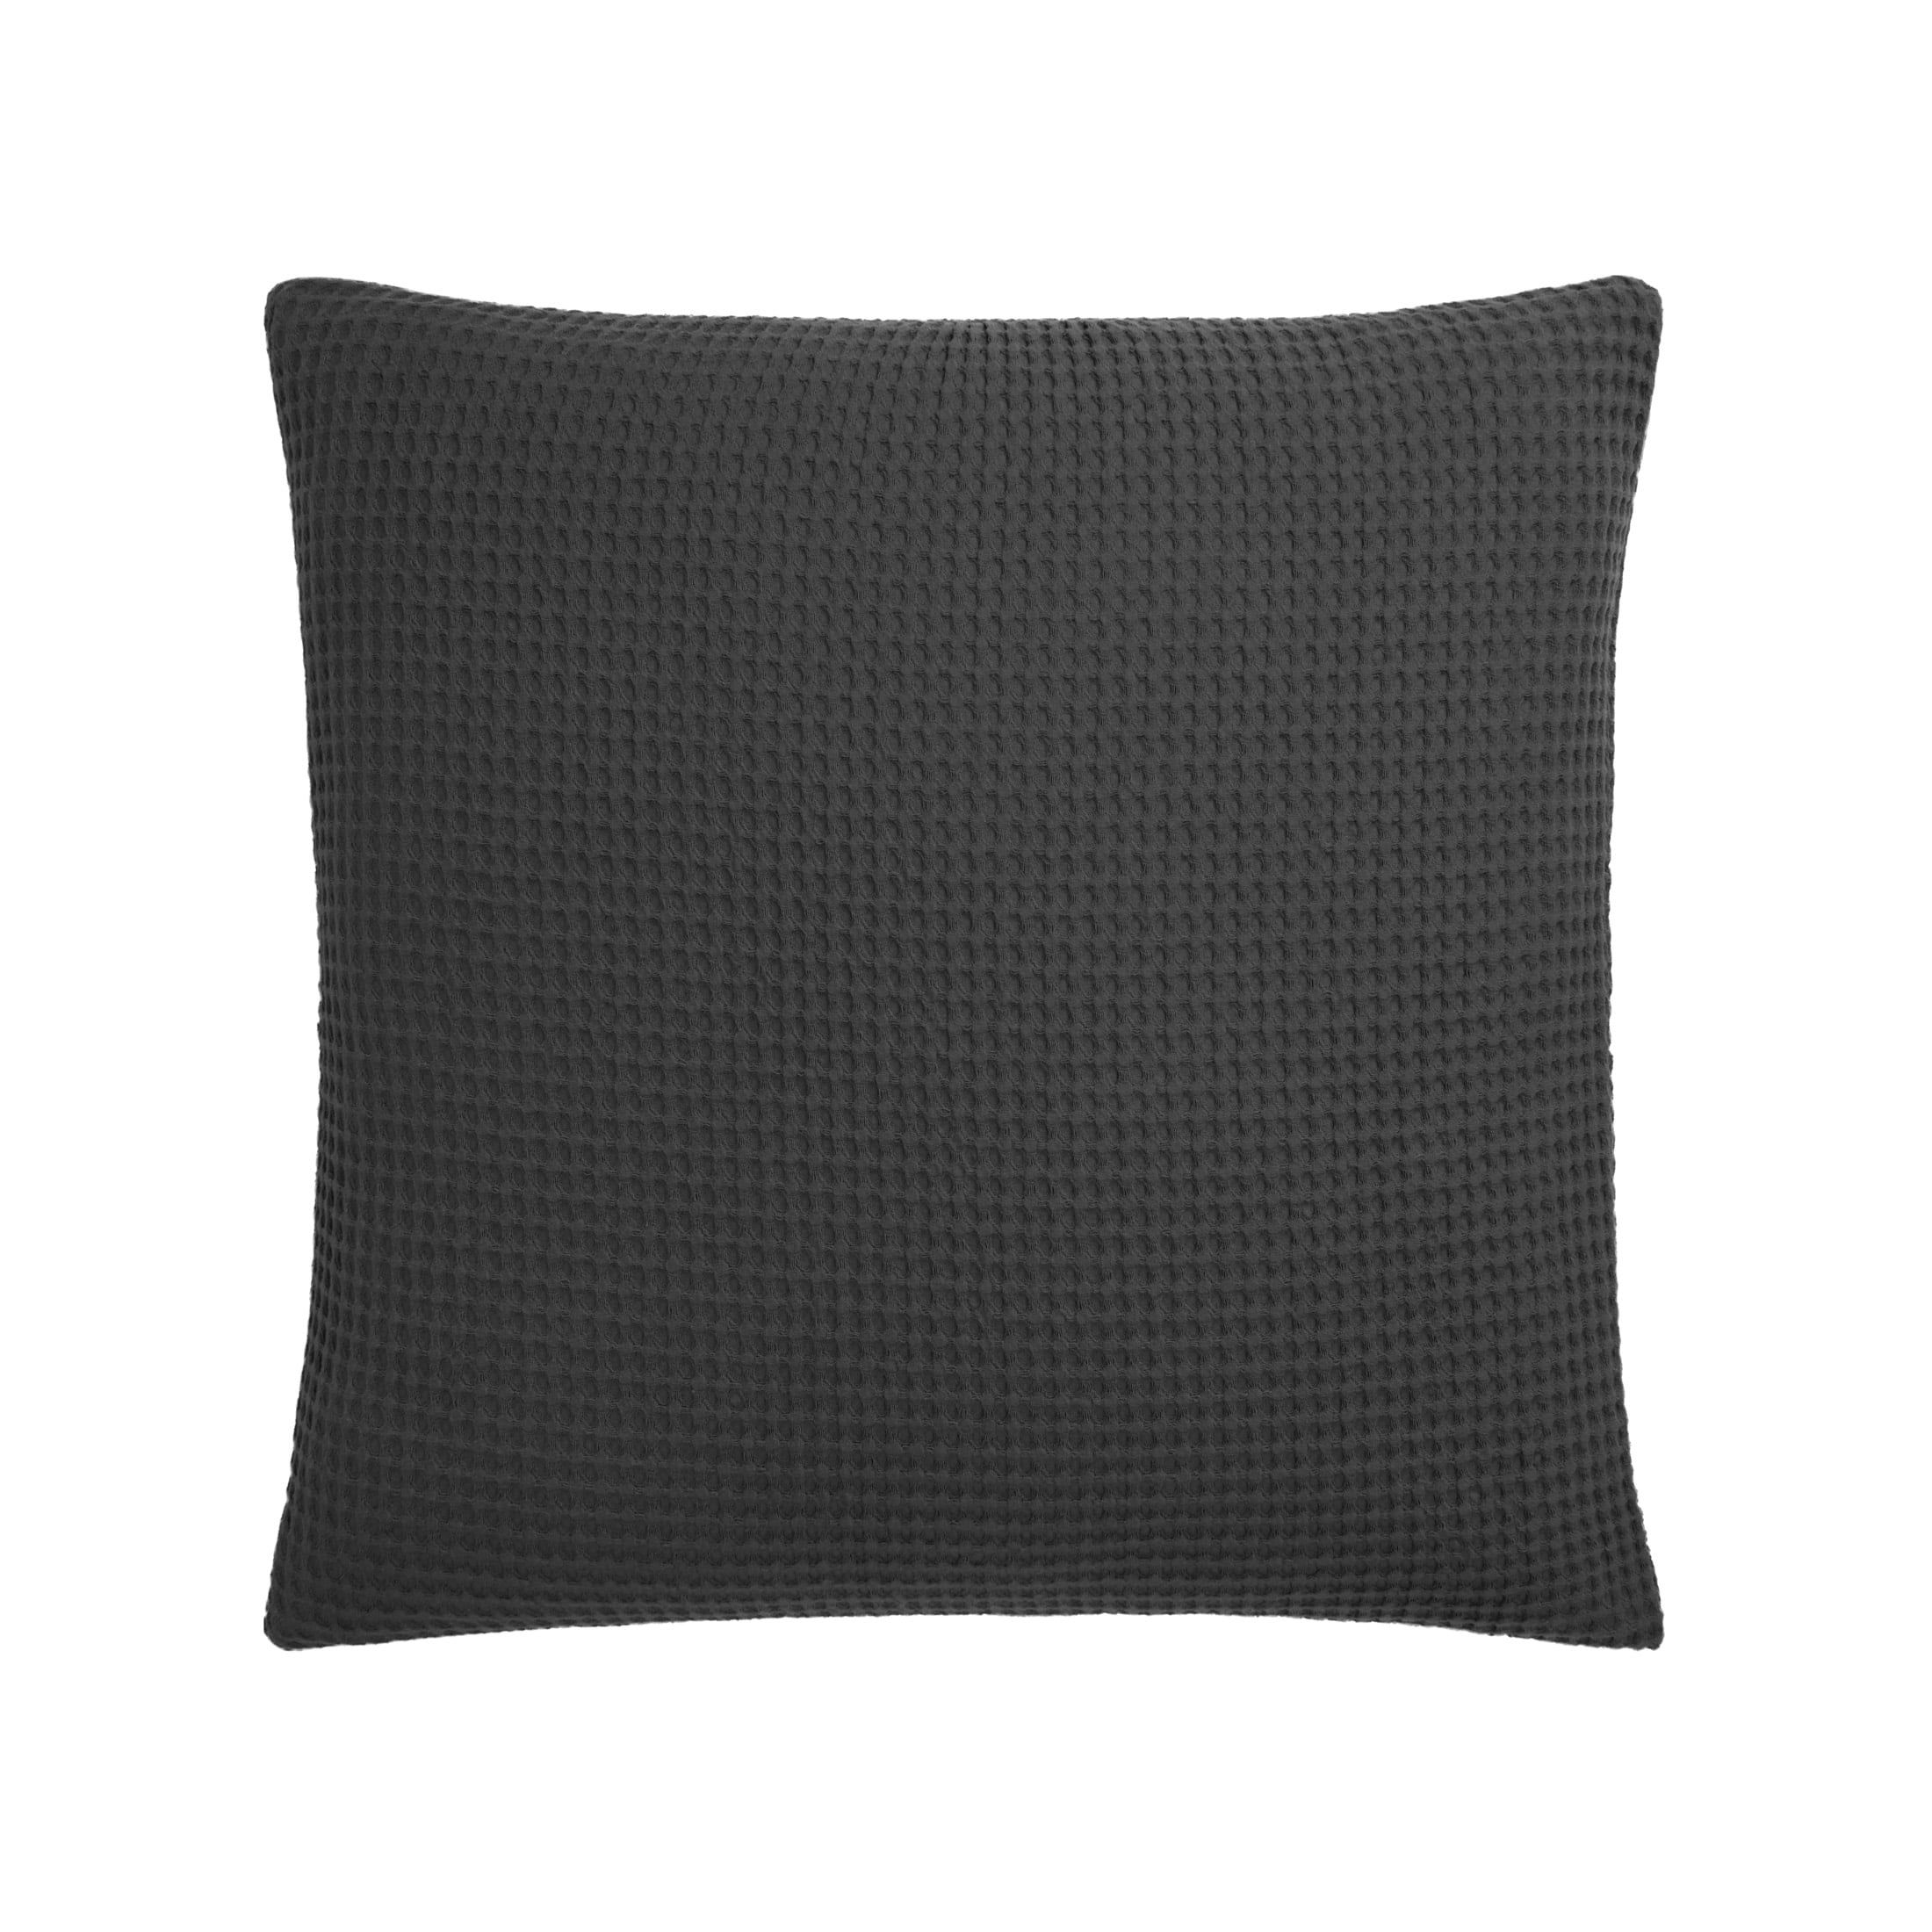 Gap Home Washed Waffle Decorative Square Throw Pillow Charcoal 18" x 18" | Walmart (US)